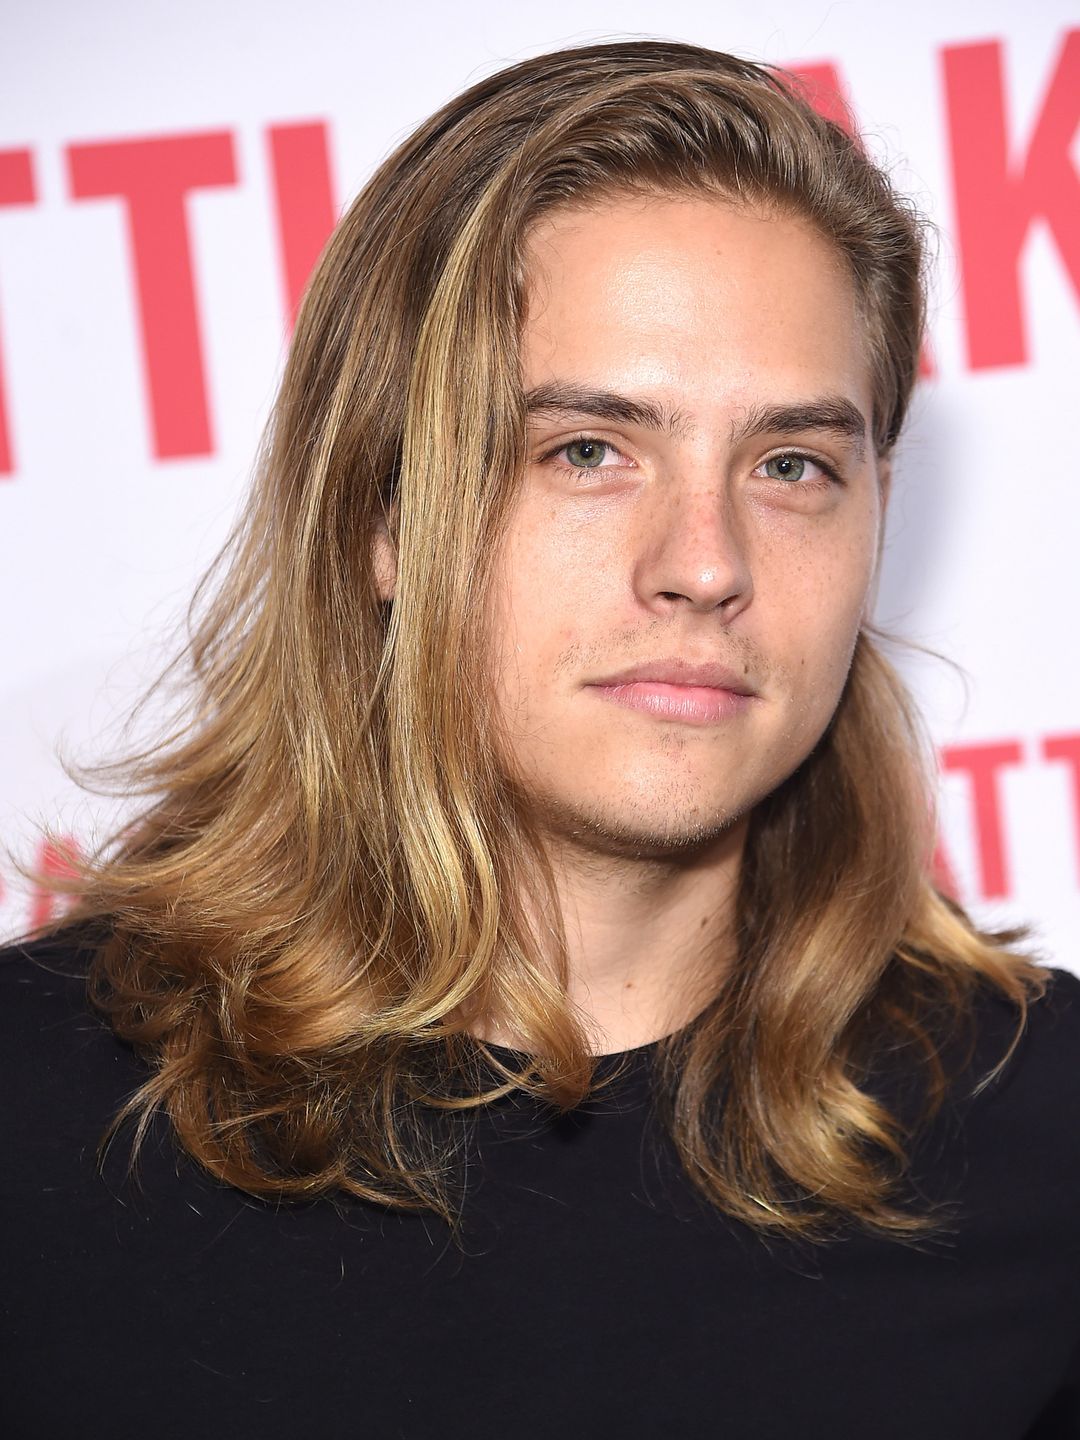 Dylan Sprouse teenage years